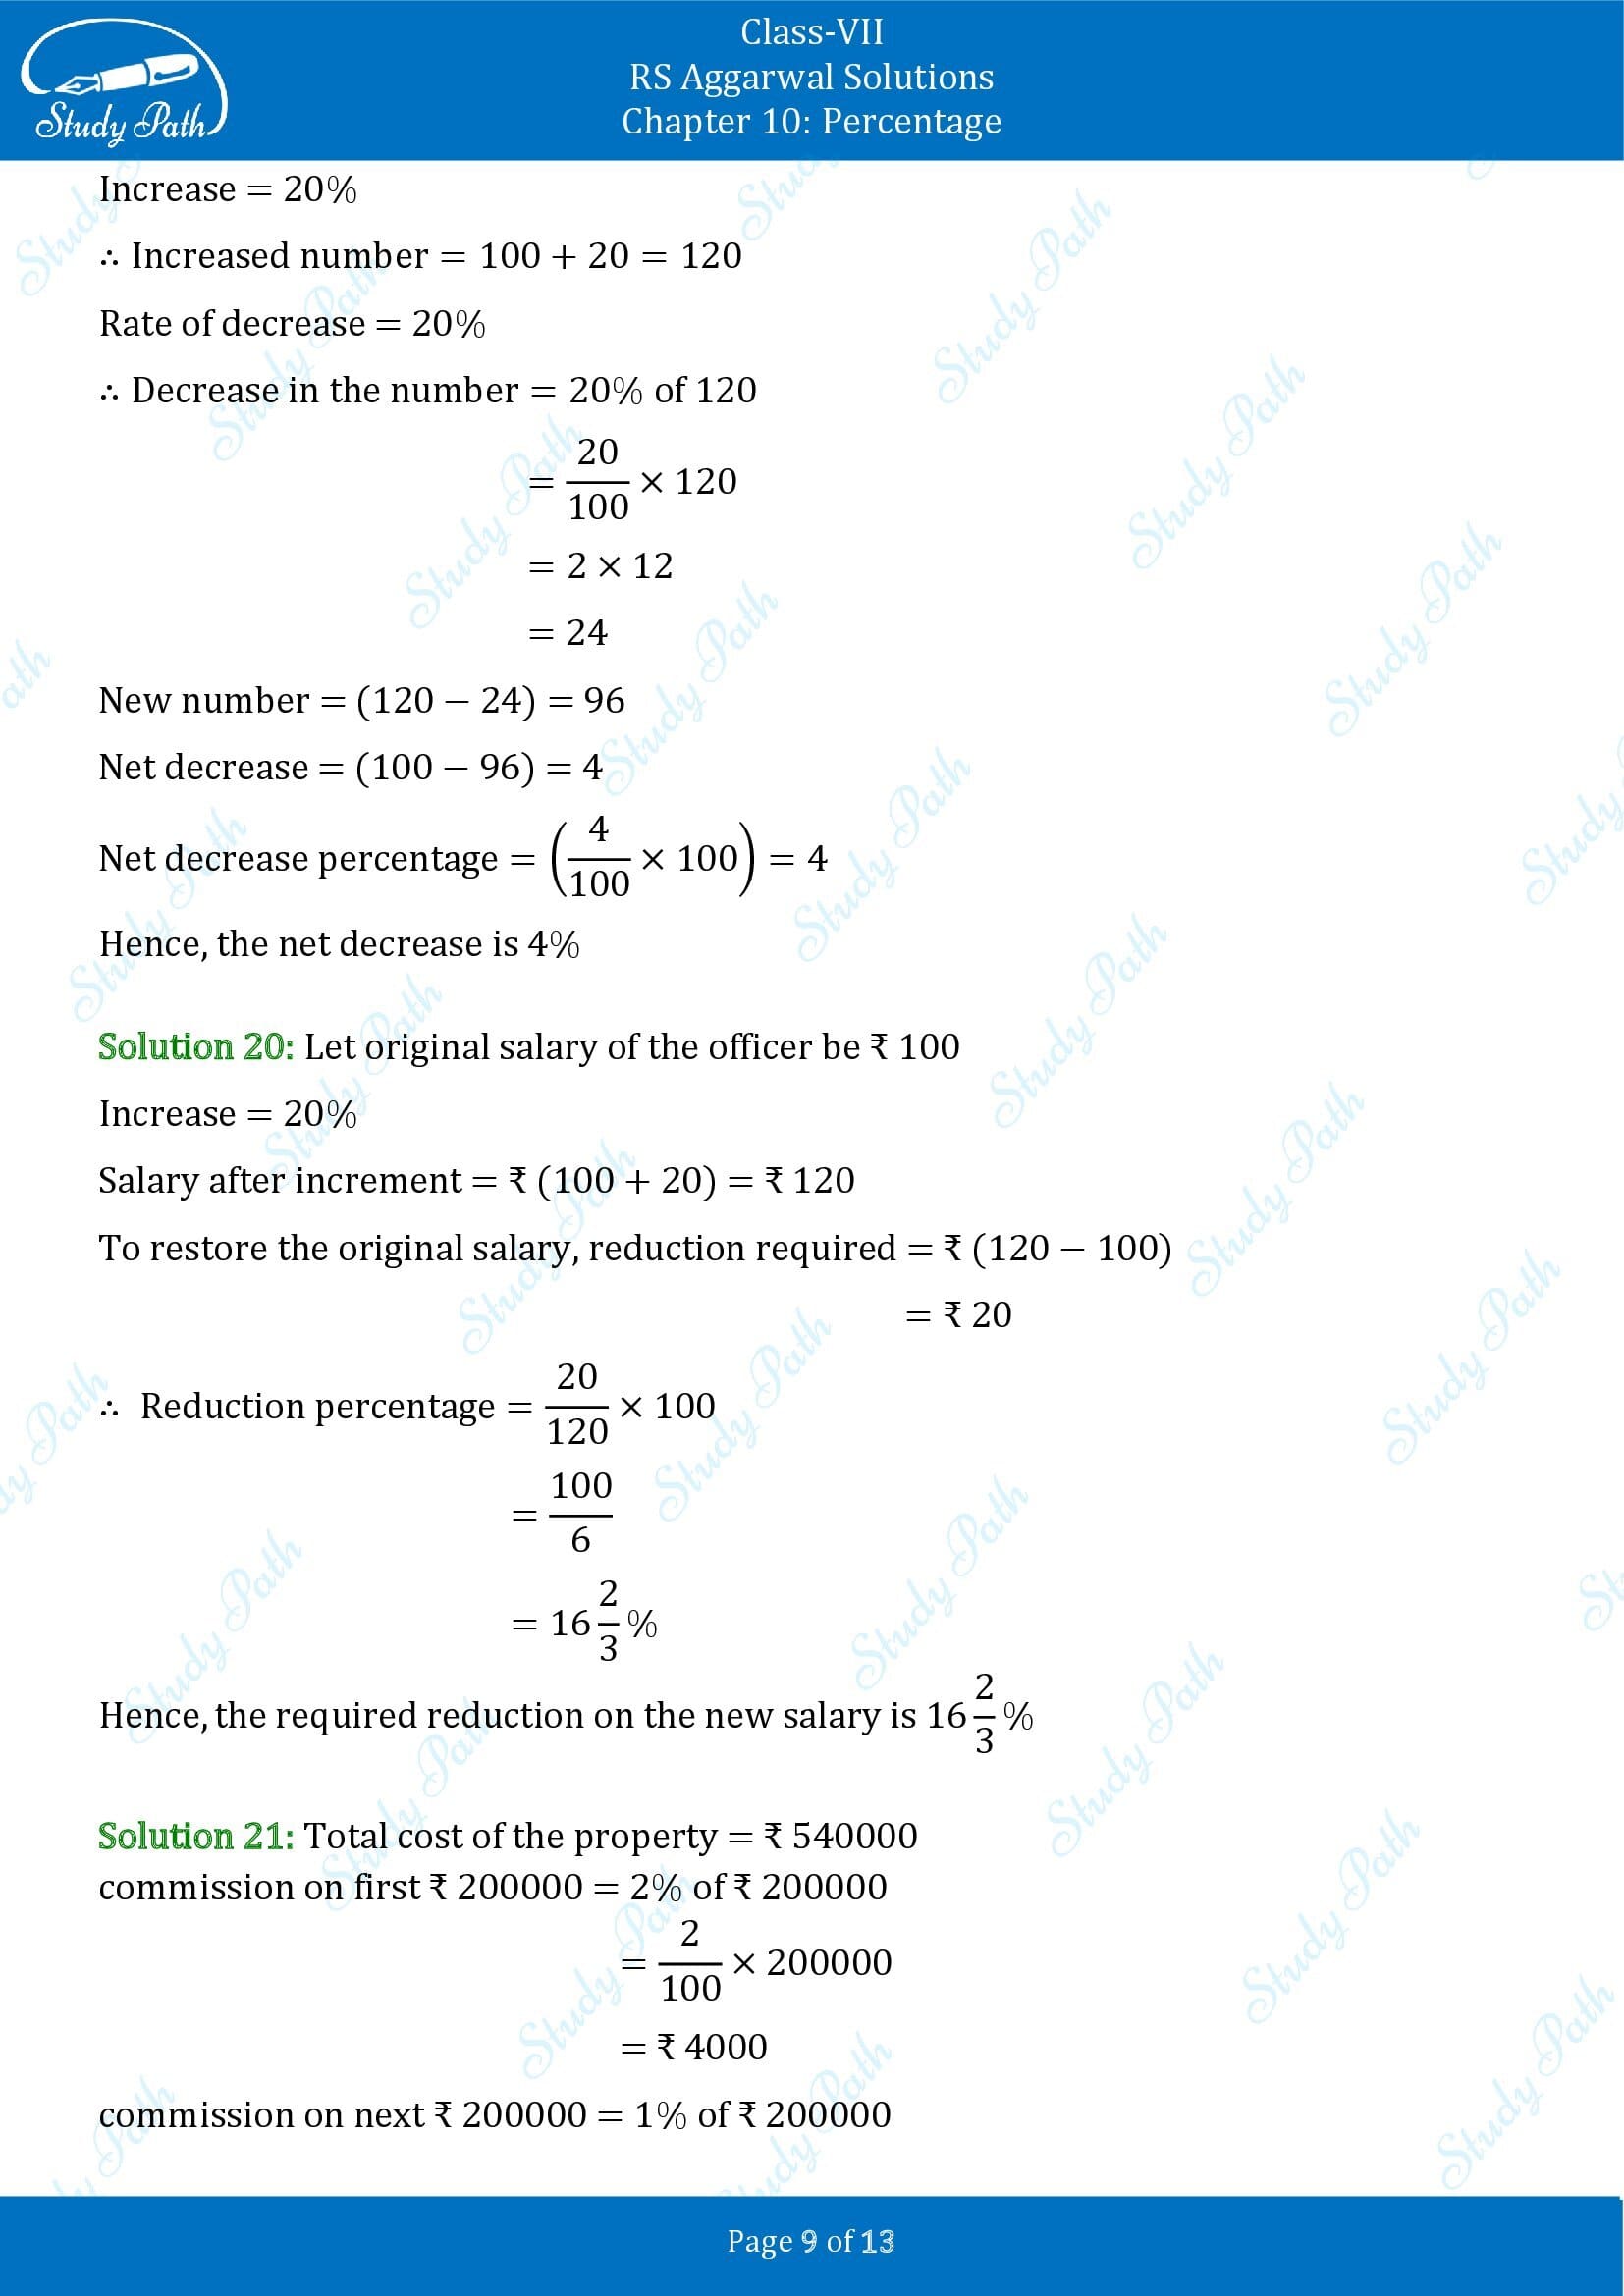 RS Aggarwal Solutions Class 7 Chapter 10 Percentage Exercise 10B 00009